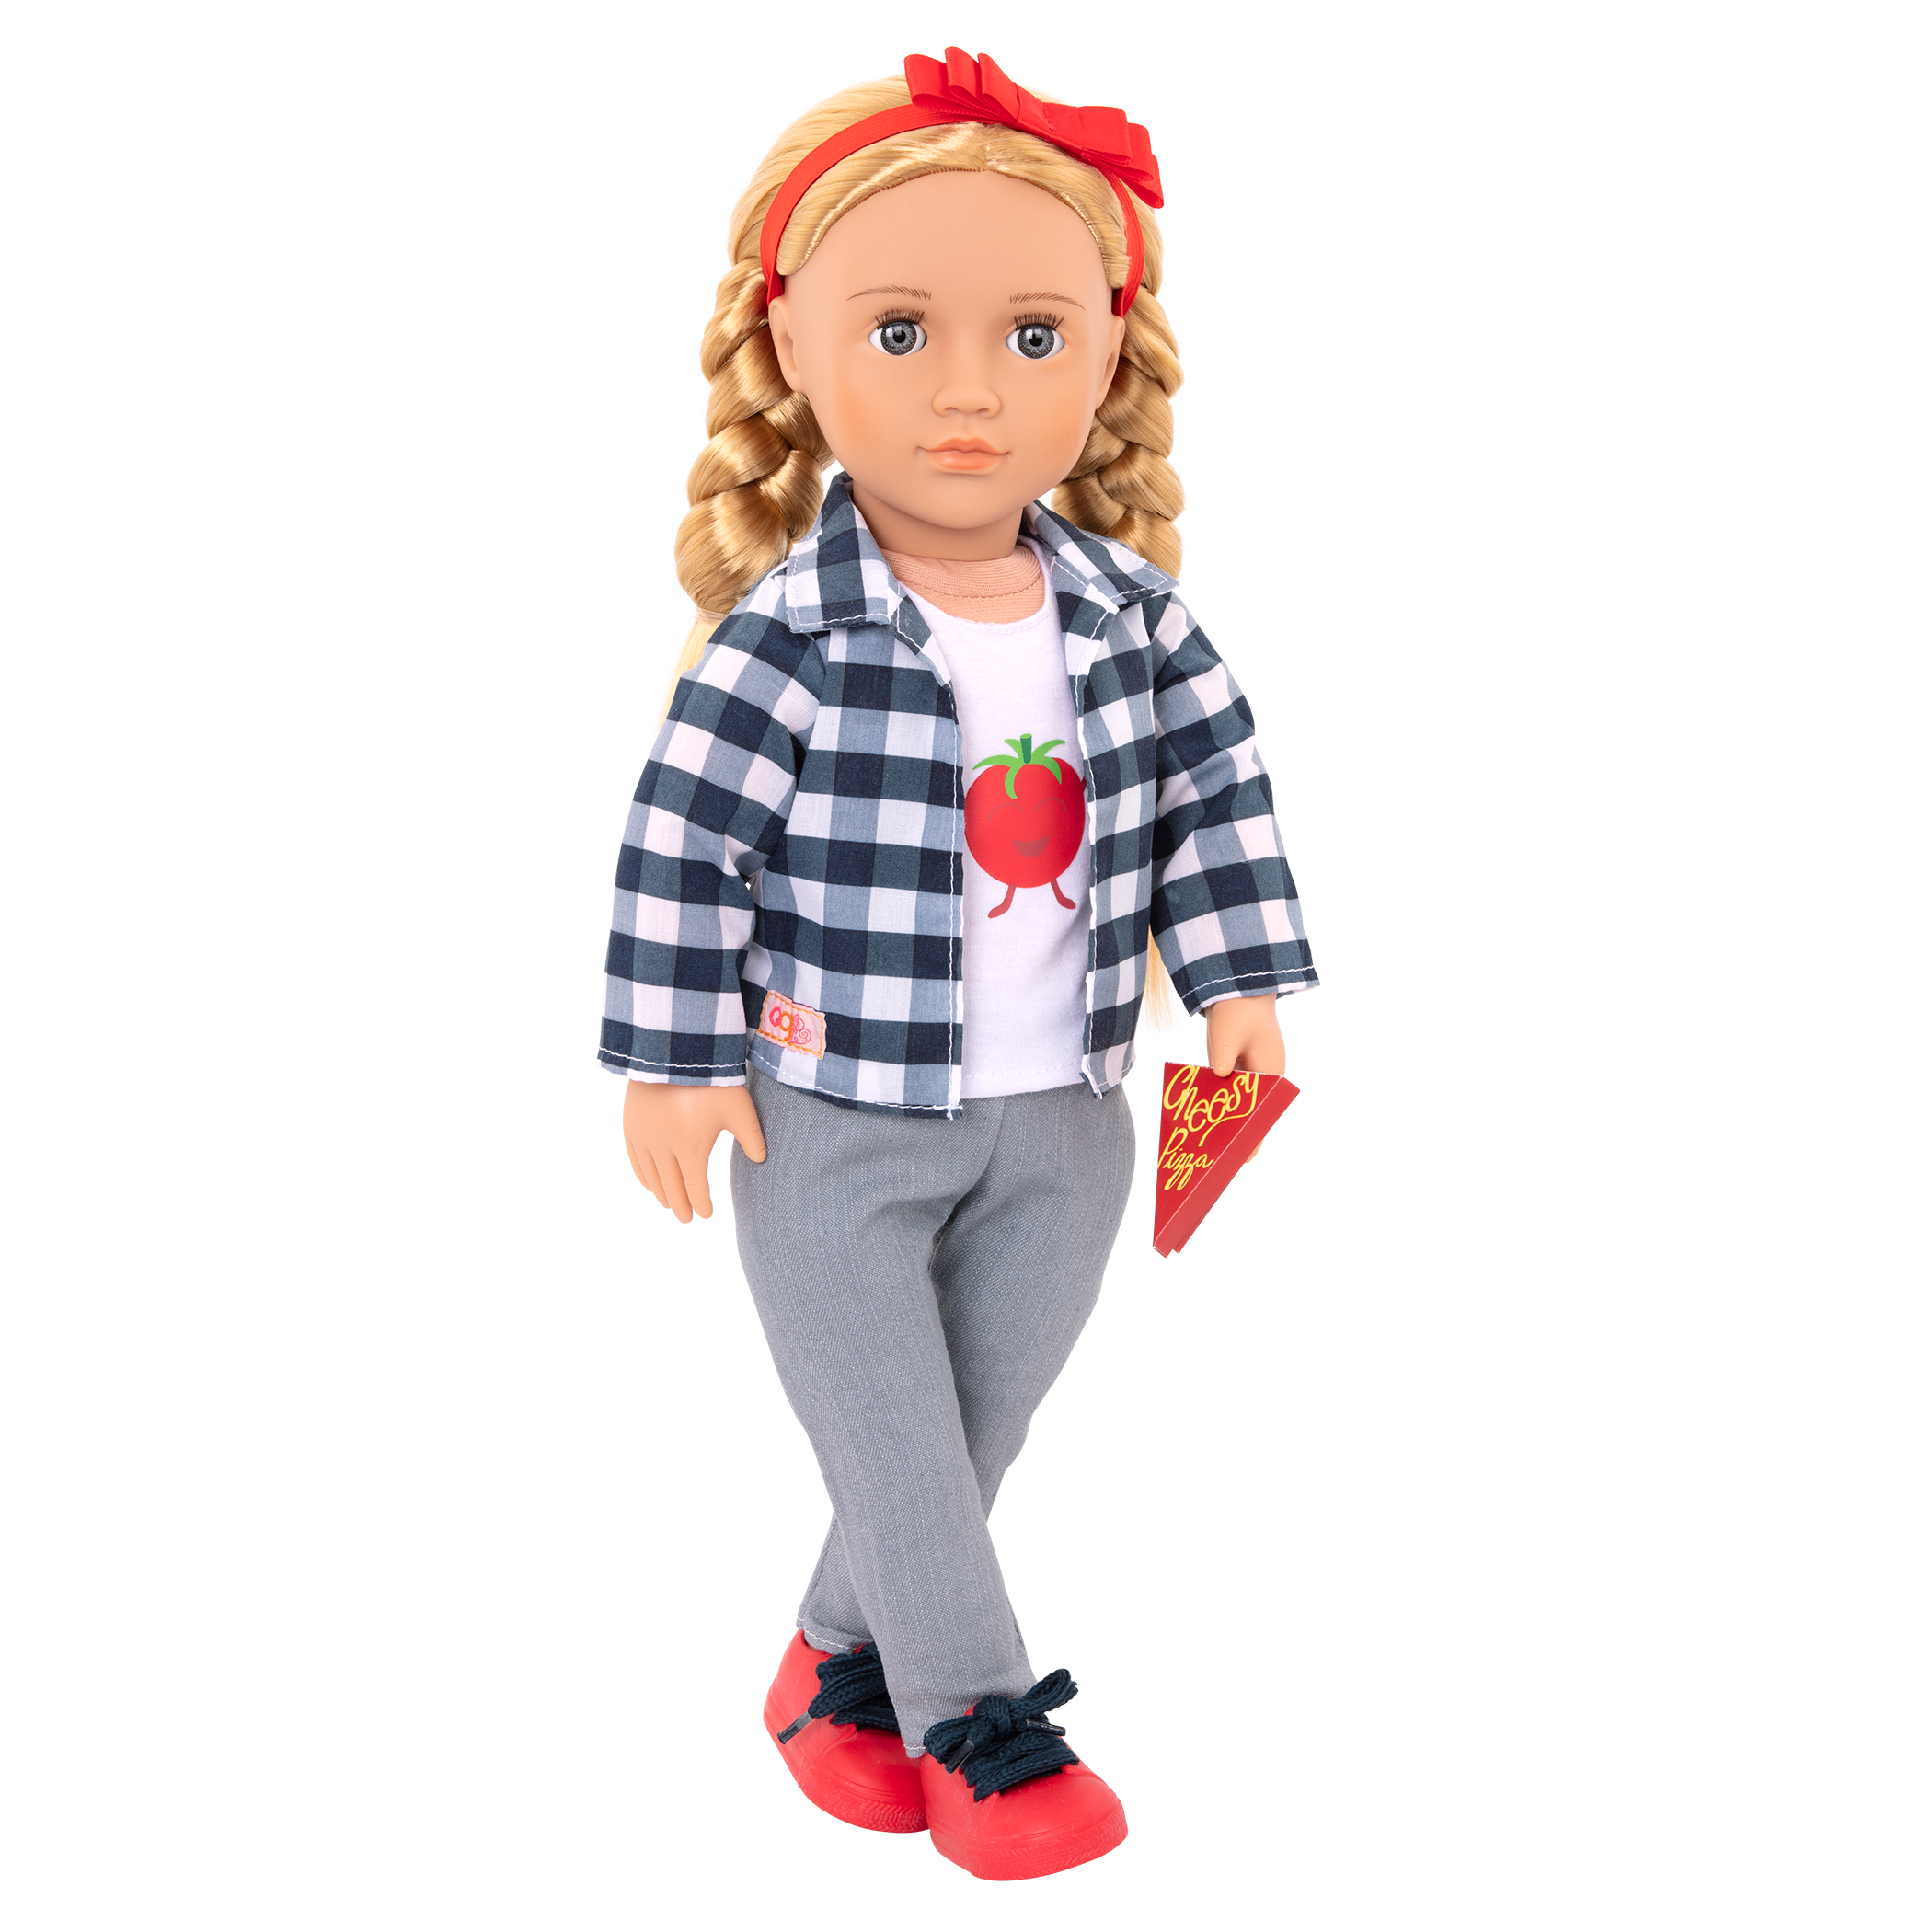 Pizza party outfit with toy pizza for 18-inch doll